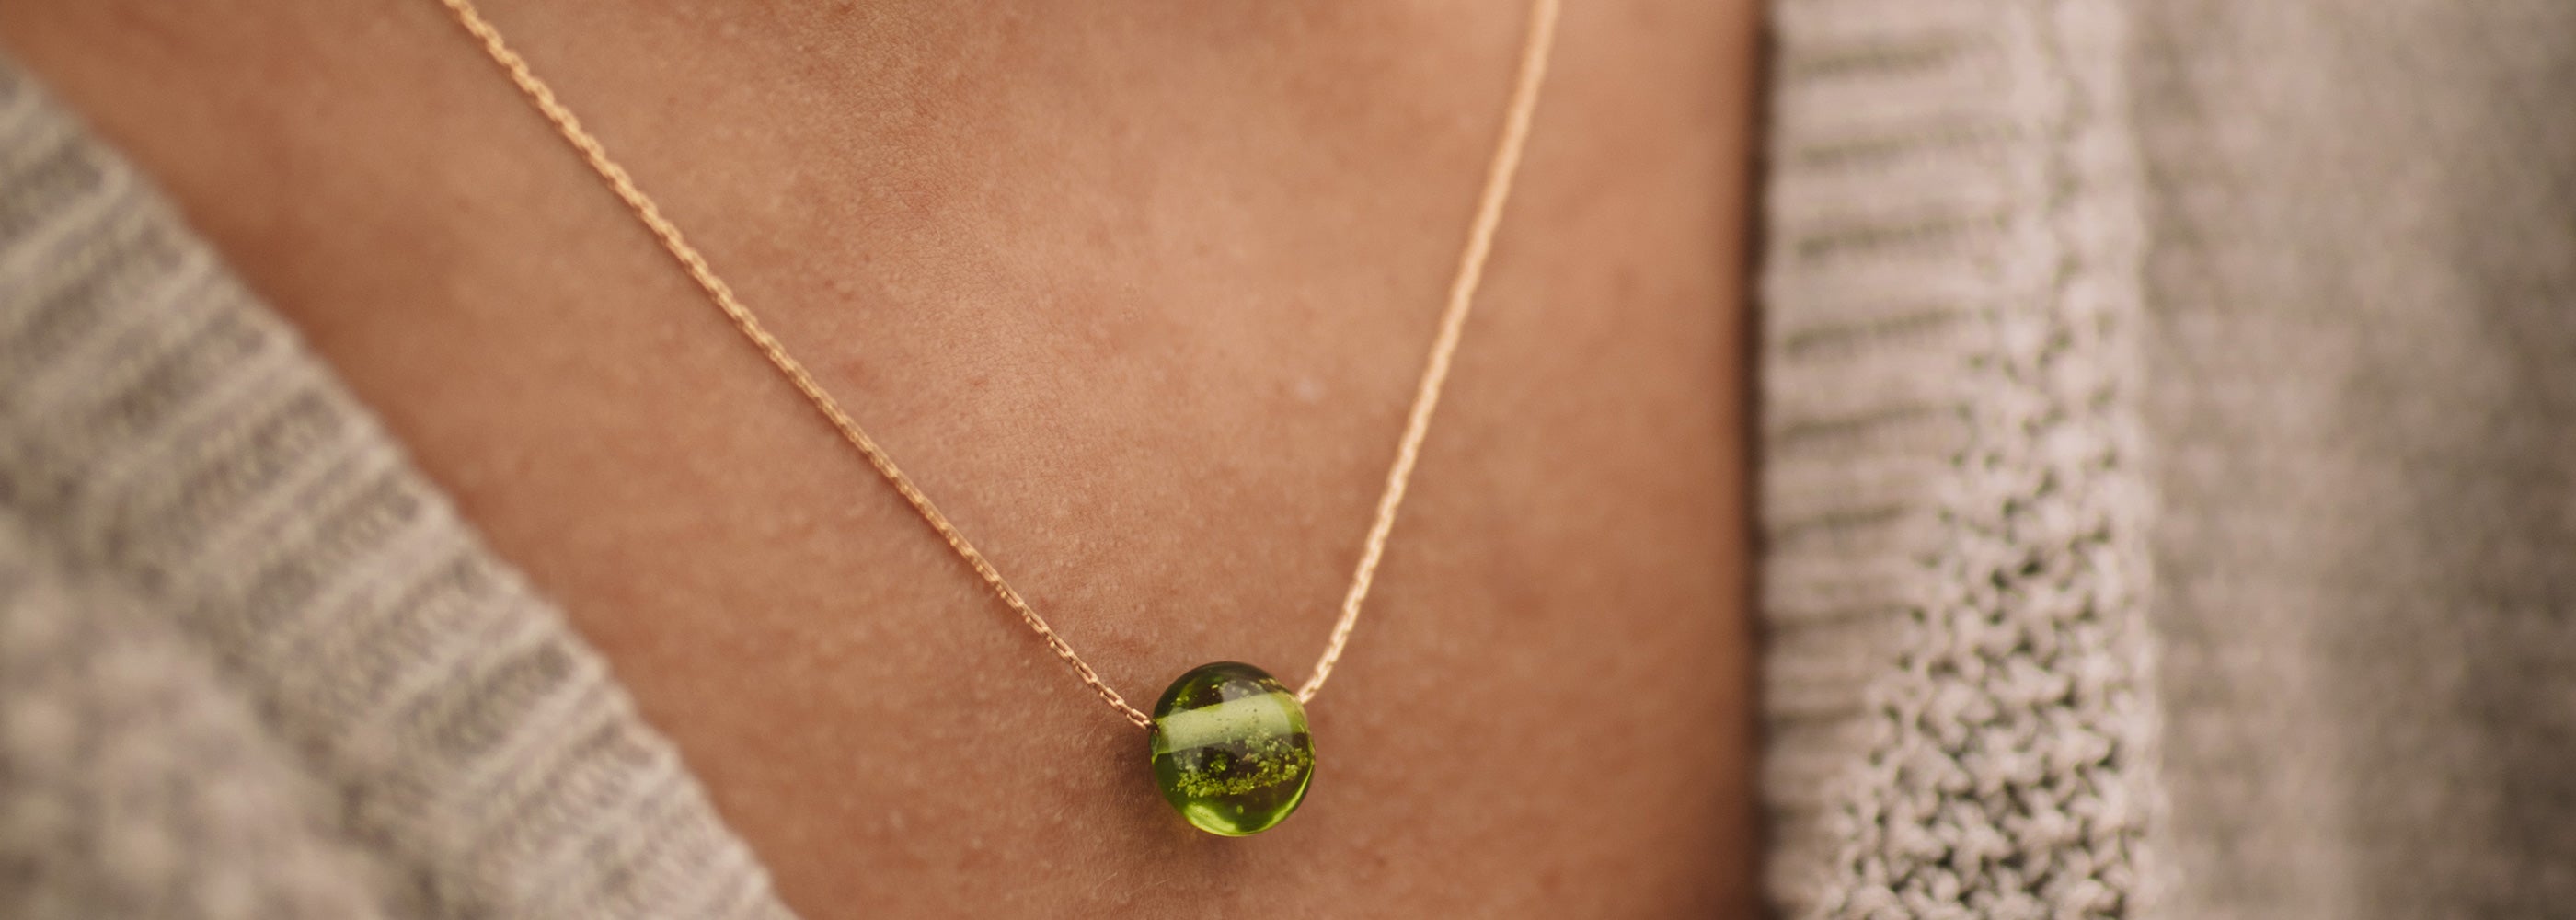 Apple green sand pebble on gold chain necklace.